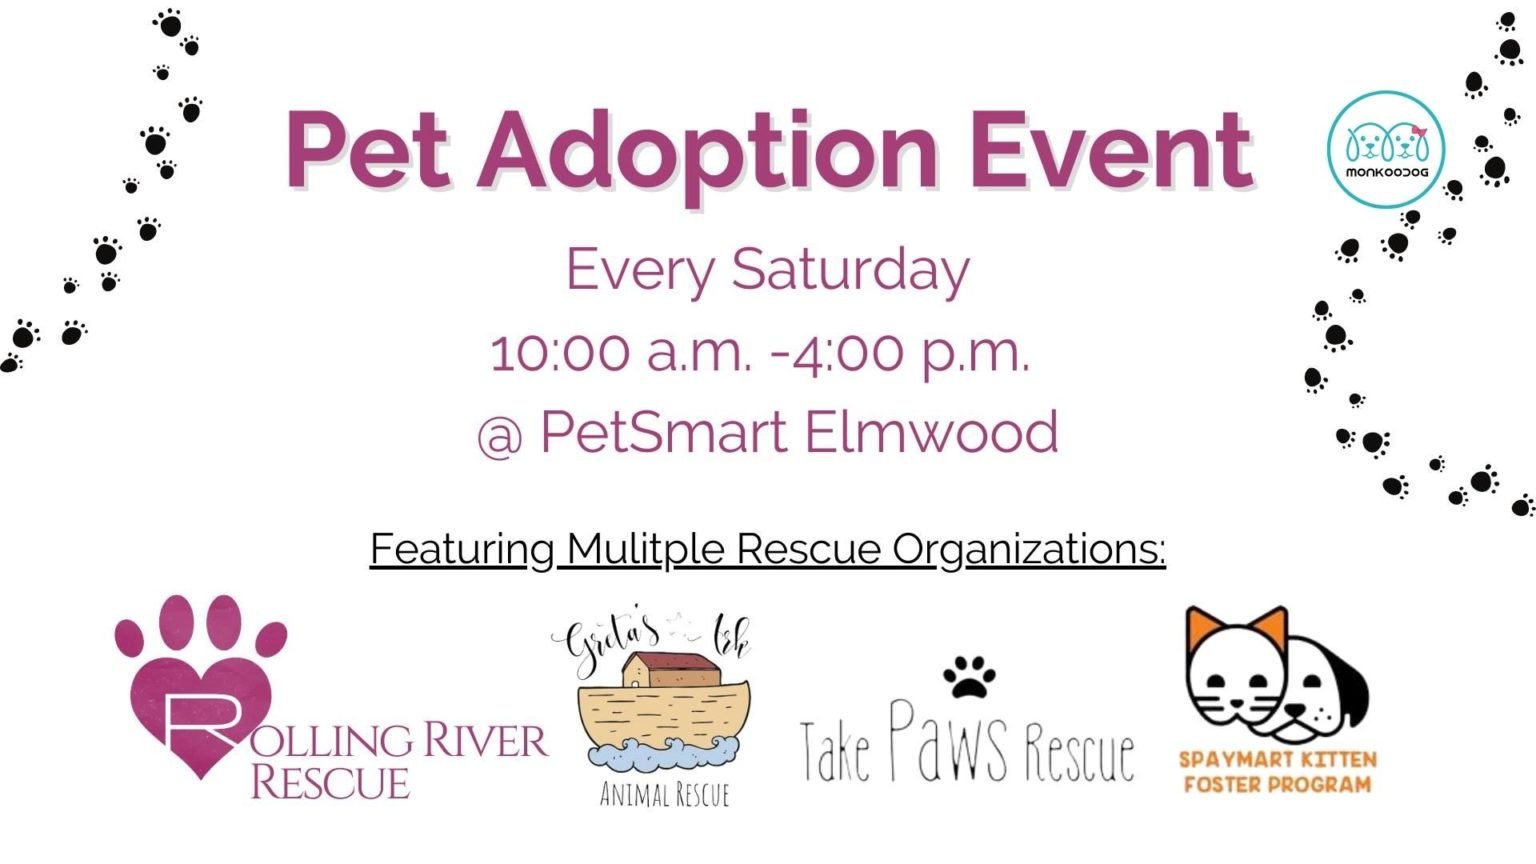 Pet Adoption Event By Rolling River Rescue Monkoodog